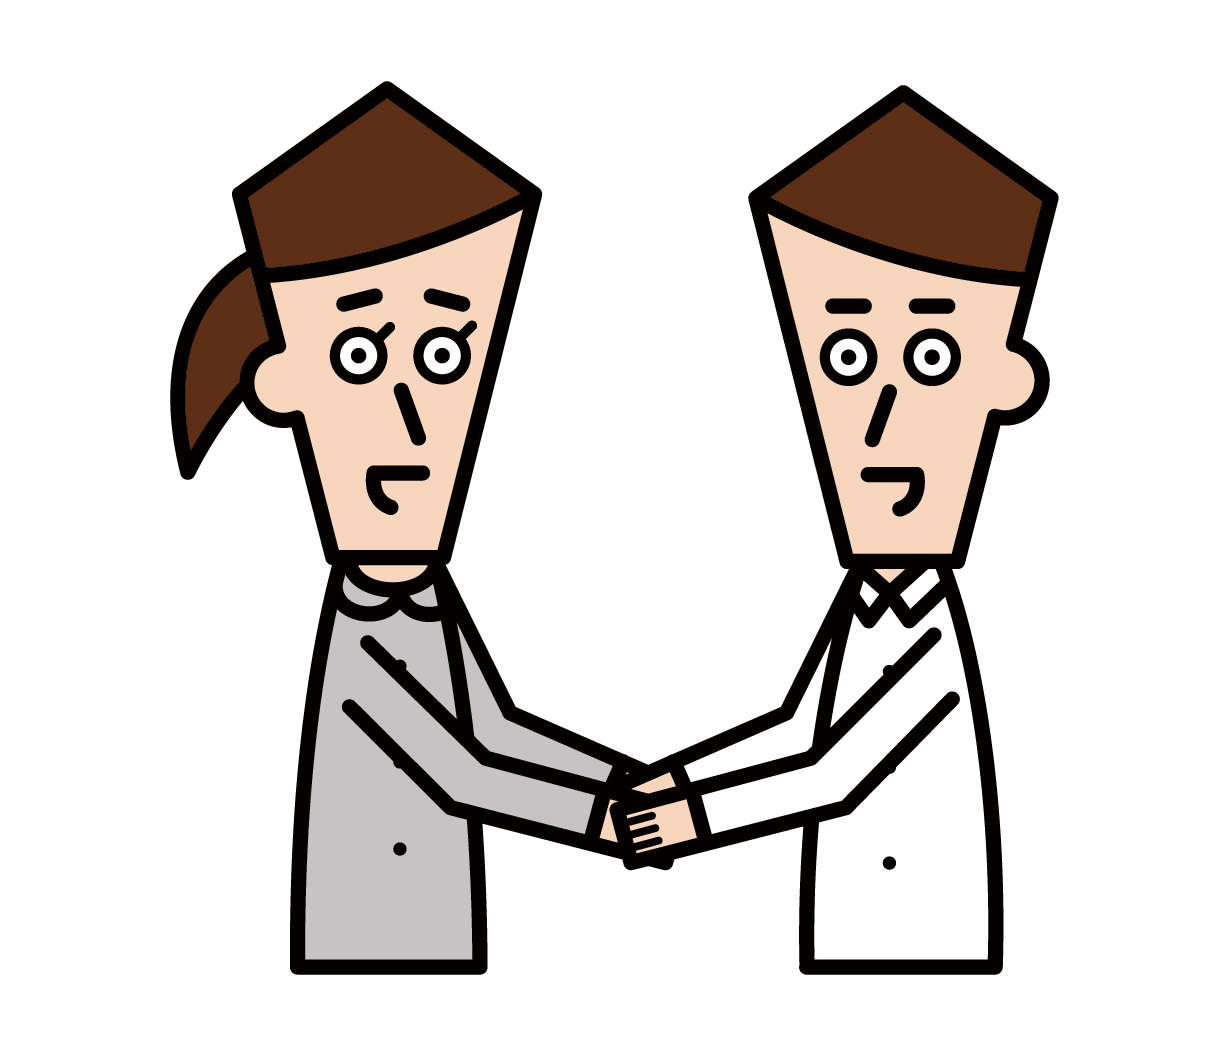 Illustration of people shaking hands and trusting relationships